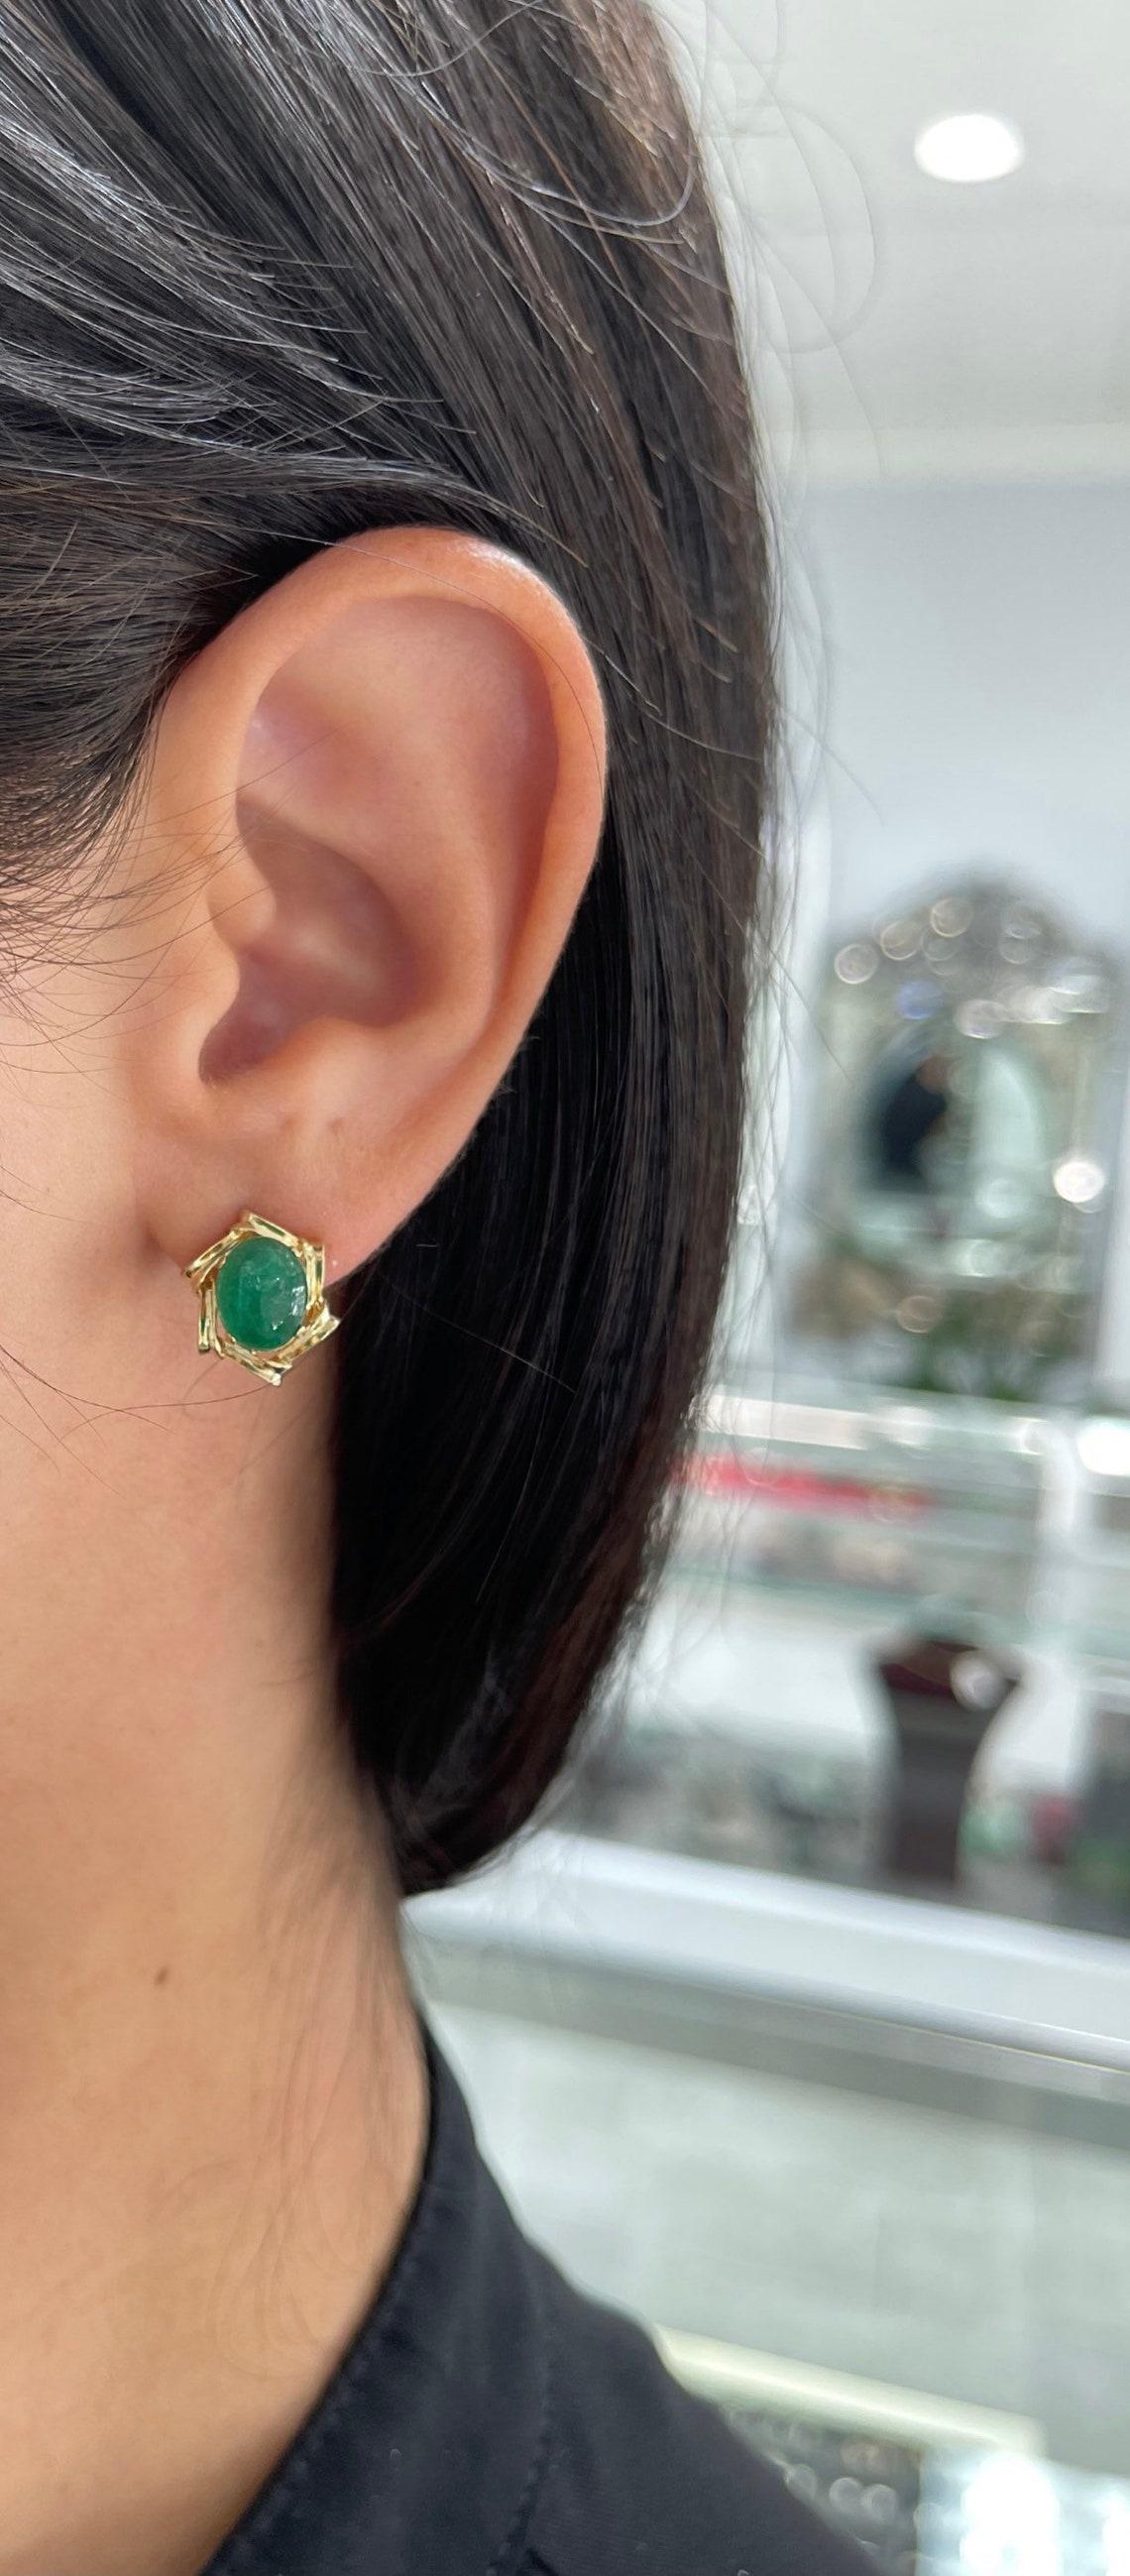 Featured here is a beautiful set of oval-cut cabochon emerald hand-made unique studs in fine 14K yellow gold. Displayed are dark rich-green emeralds with very good transparency, accented by a simple bezel set victorian vintage gold mount, allowing